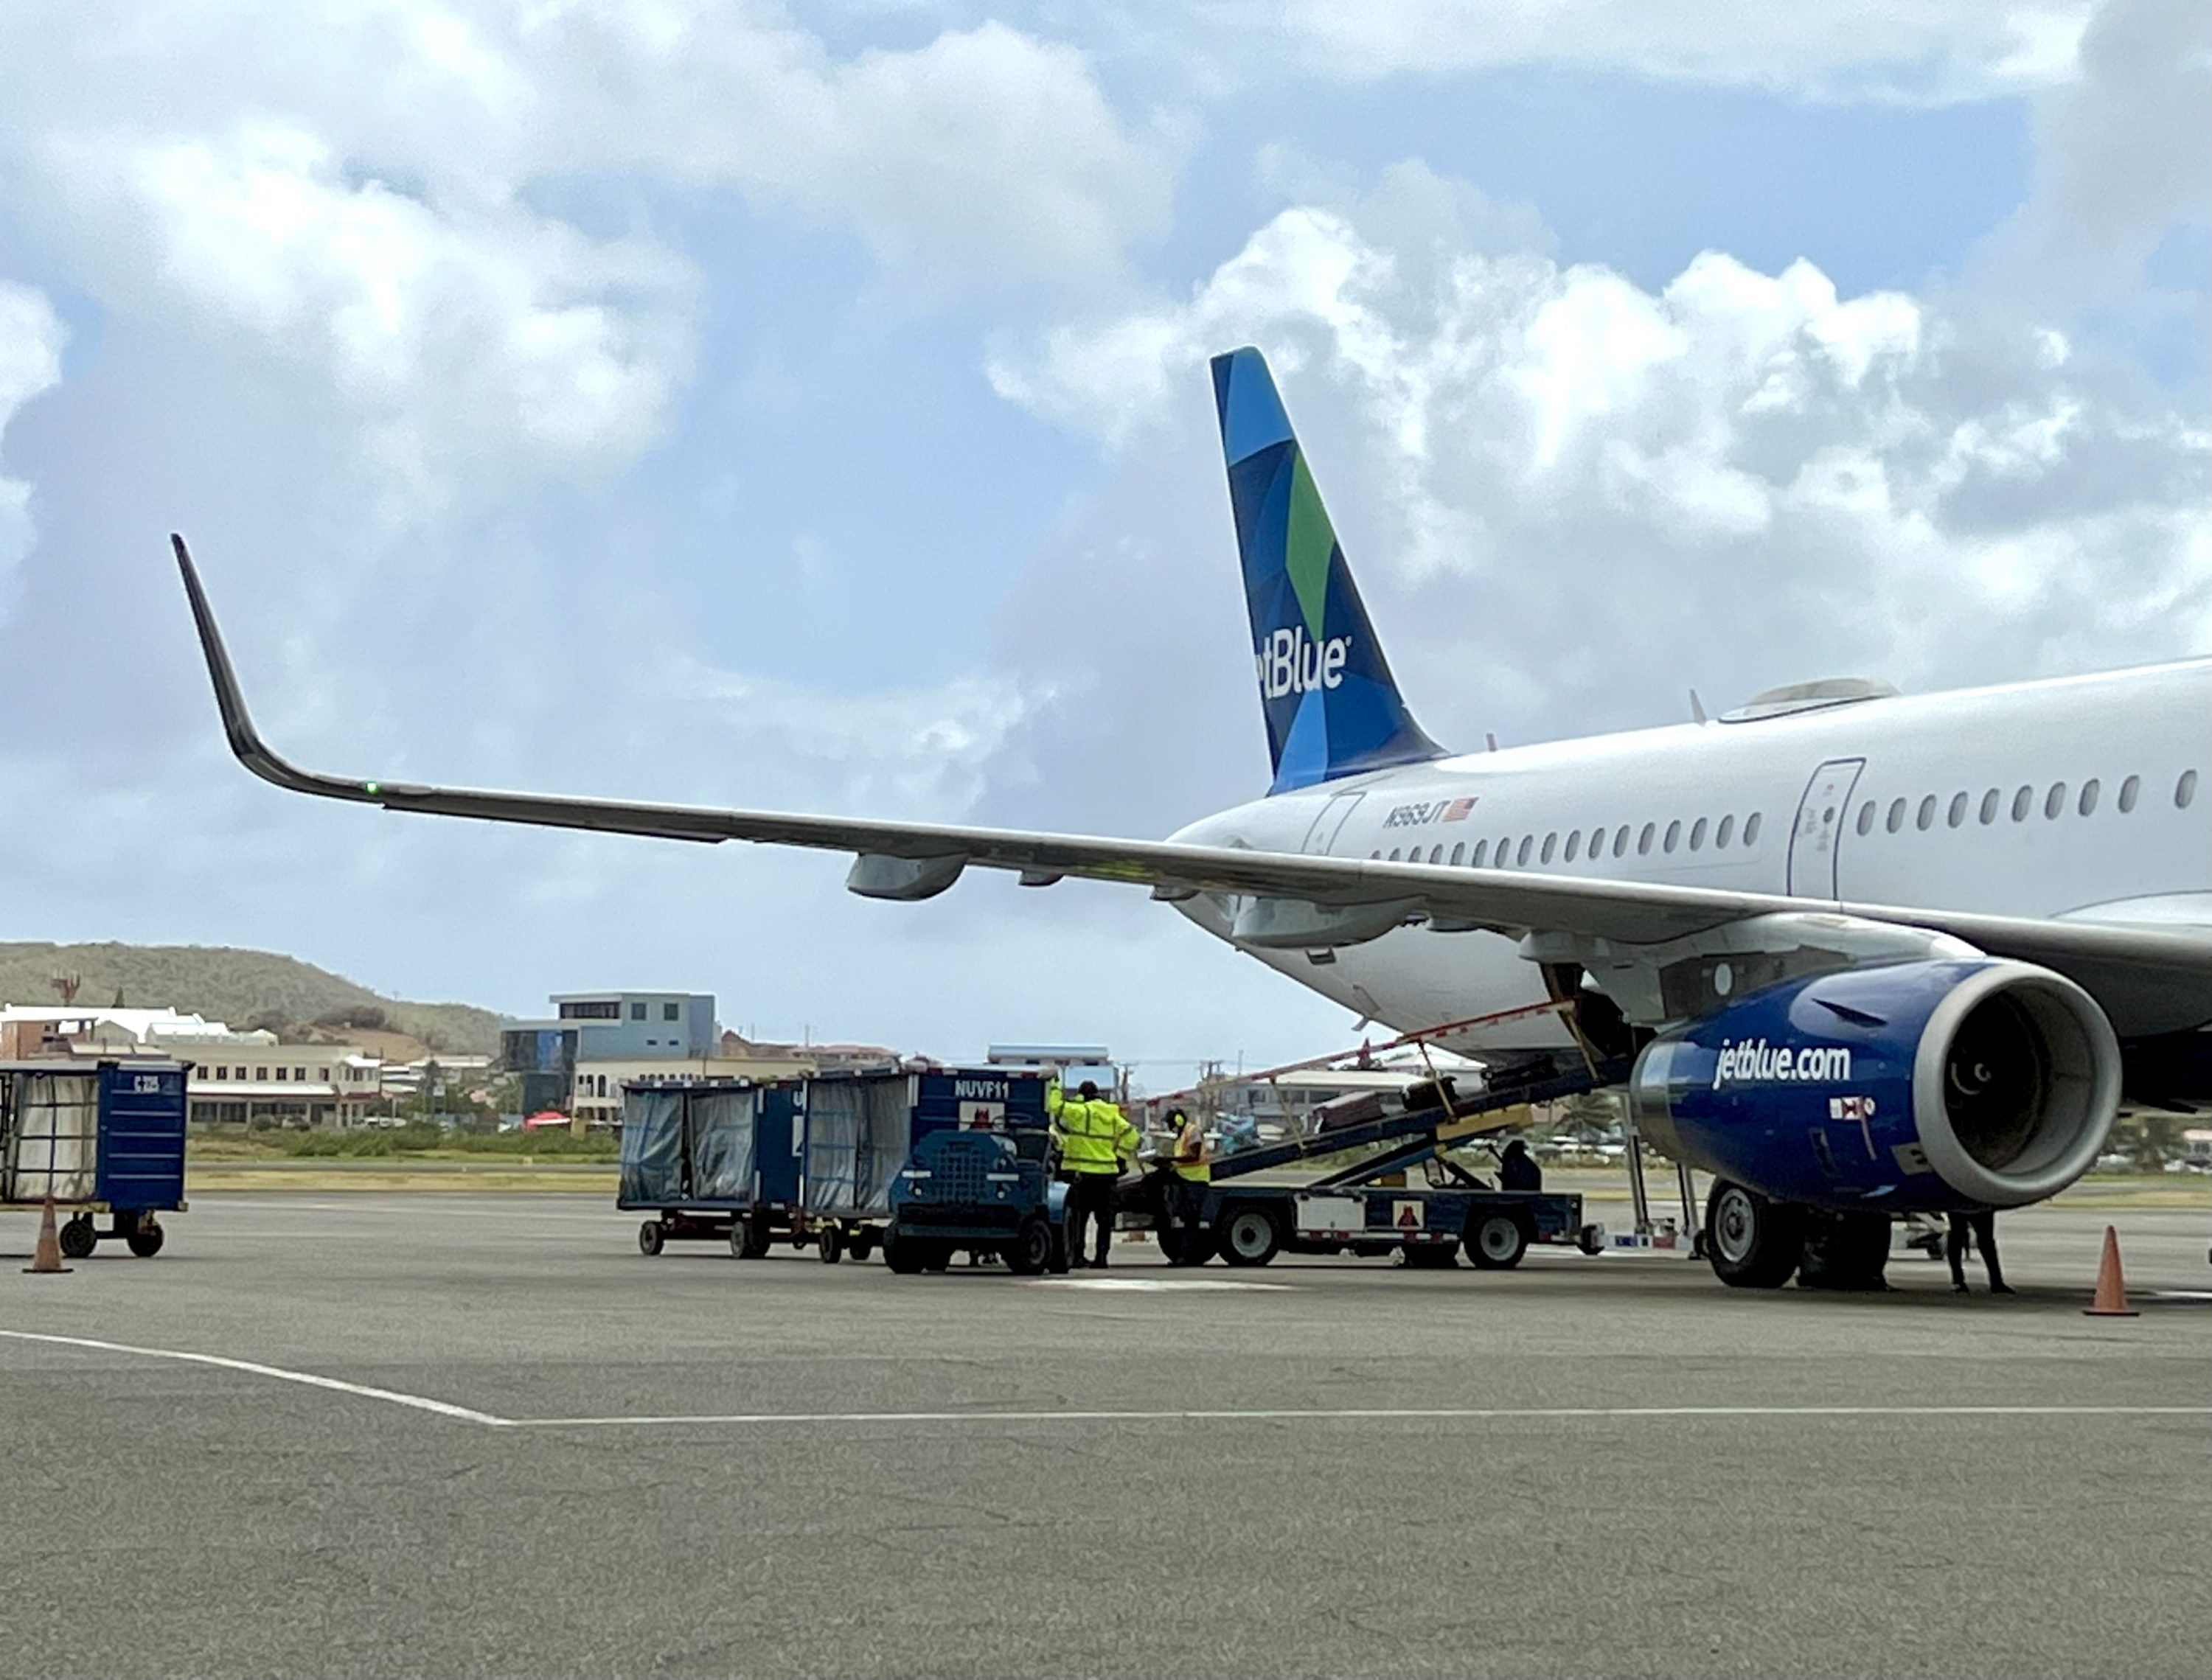 You'll soon be able to redeem your JetBlue points for a statement credit on your JetBlue Plus card. Image Credit: Daniel Ross